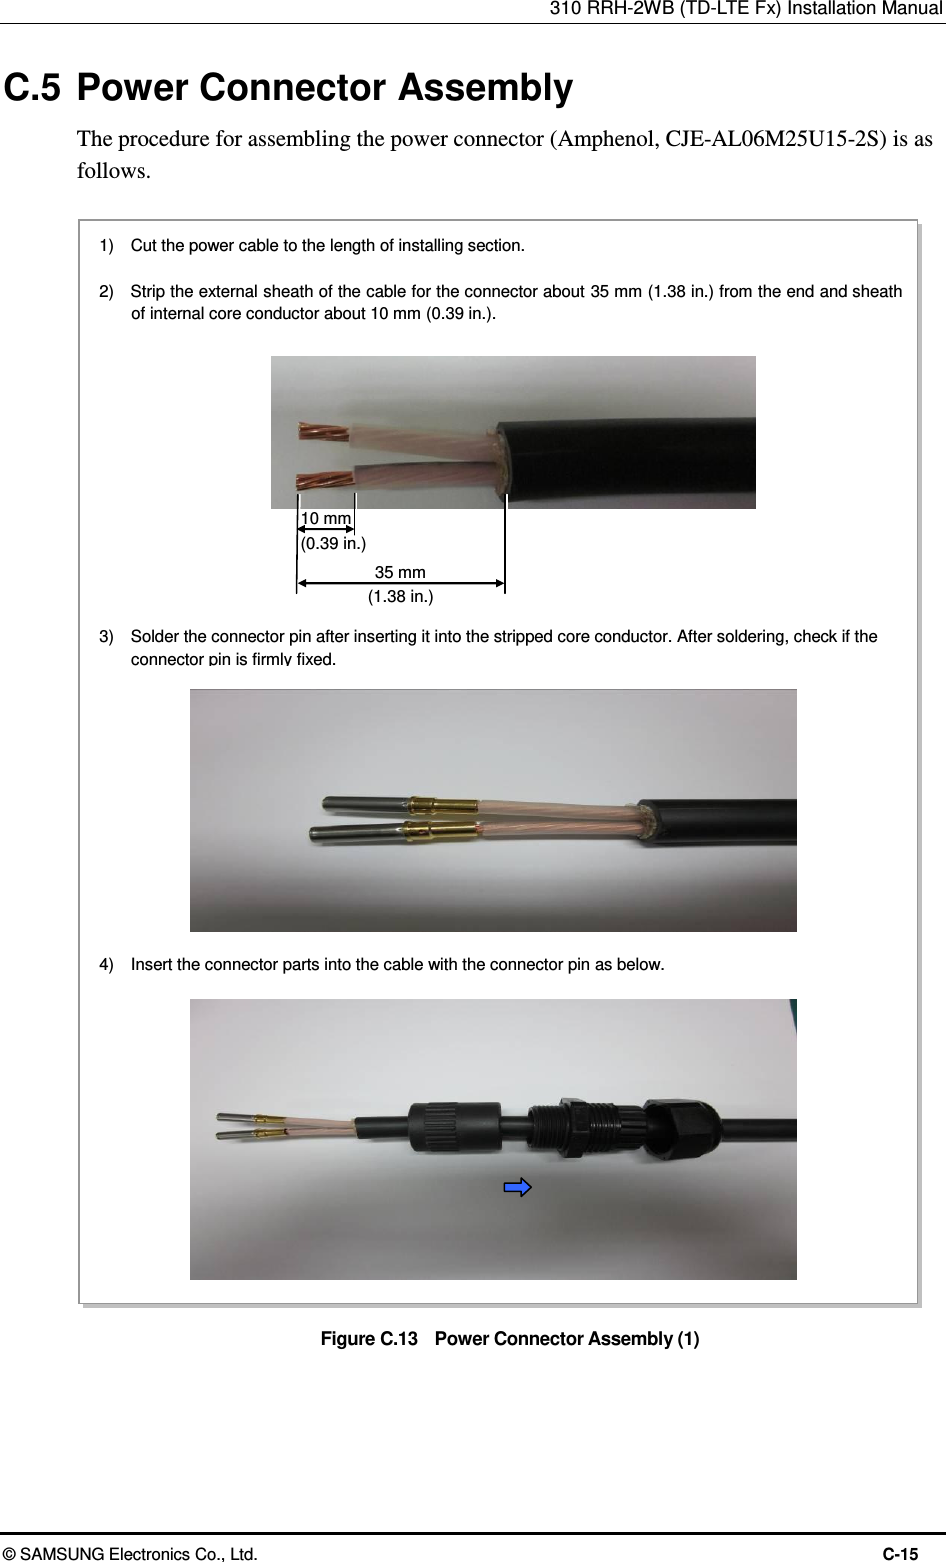 310 RRH-2WB (TD-LTE Fx) Installation Manual  © SAMSUNG Electronics Co., Ltd.  C-15 C.5 Power Connector Assembly The procedure for assembling the power connector (Amphenol, CJE-AL06M25U15-2S) is as follows.  Figure C.13    Power Connector Assembly (1)  10 mm (0.39 in.) 1)    Cut the power cable to the length of installing section.  2)    Strip the external sheath of the cable for the connector about 35 mm (1.38 in.) from the end and sheath of internal core conductor about 10 mm (0.39 in.). 35 mm (1.38 in.) 3)    Solder the connector pin after inserting it into the stripped core conductor. After soldering, check if the connector pin is firmly fixed. 4)    Insert the connector parts into the cable with the connector pin as below. 